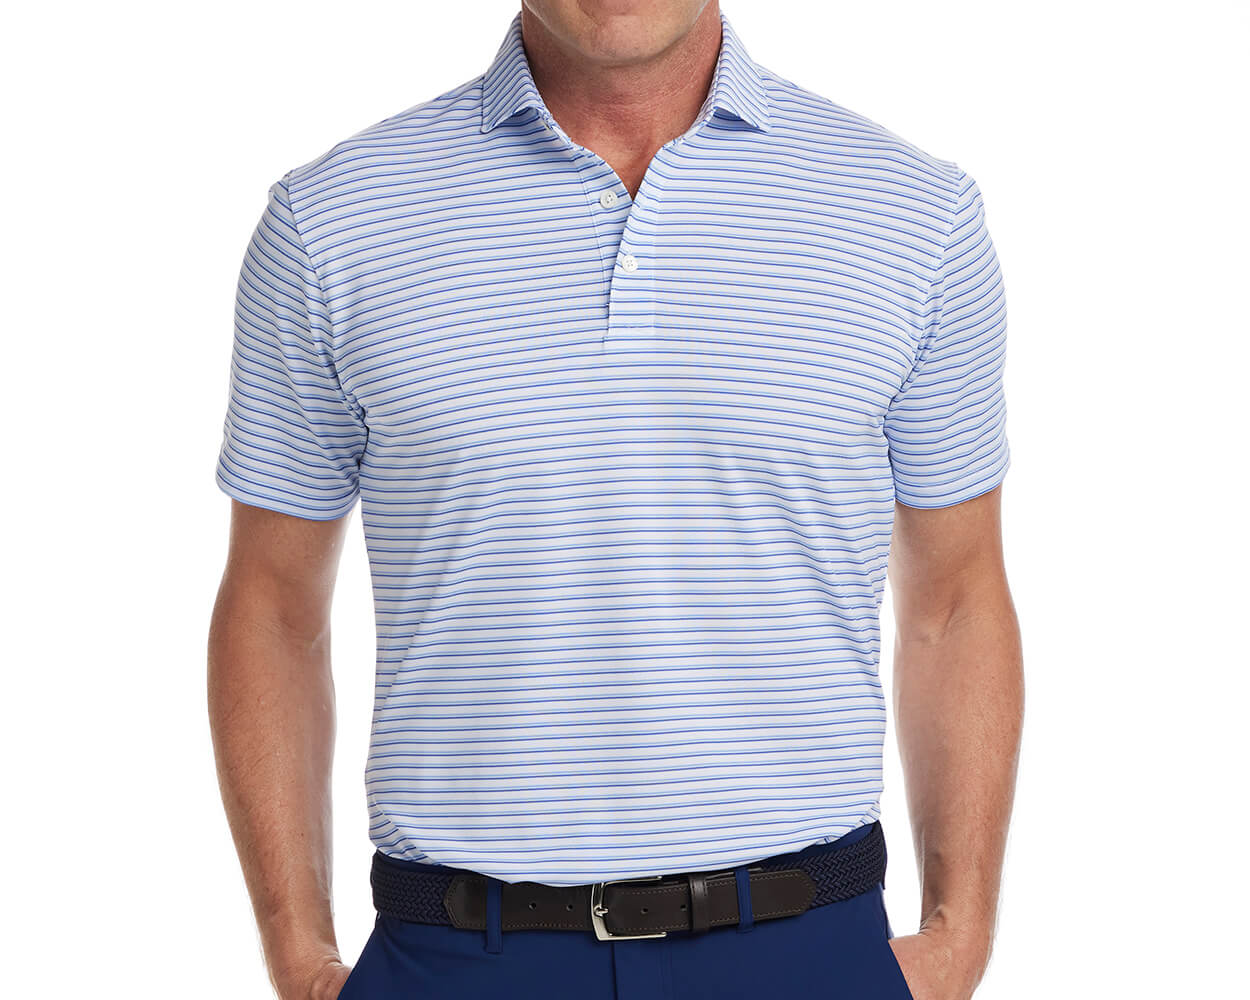 Front shot of Holderness and Bourne white shirt with blue stripes modeled on man's torso.